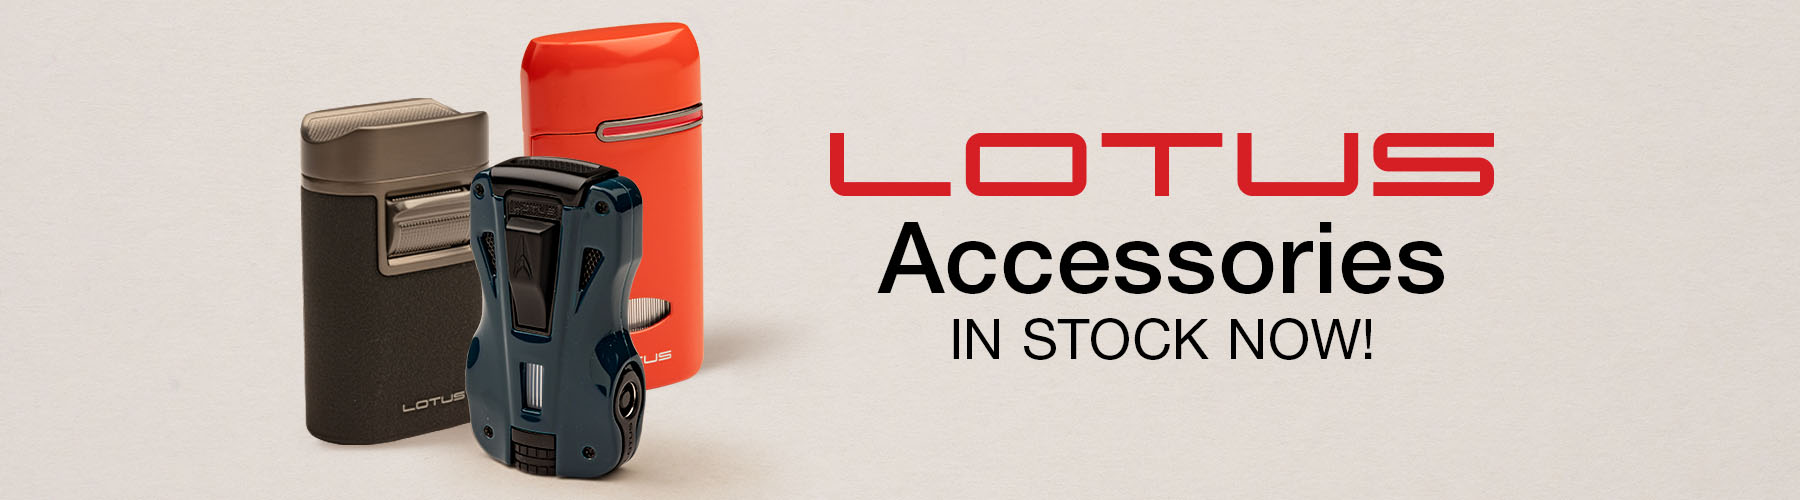 Lotus Accessories in stock now!